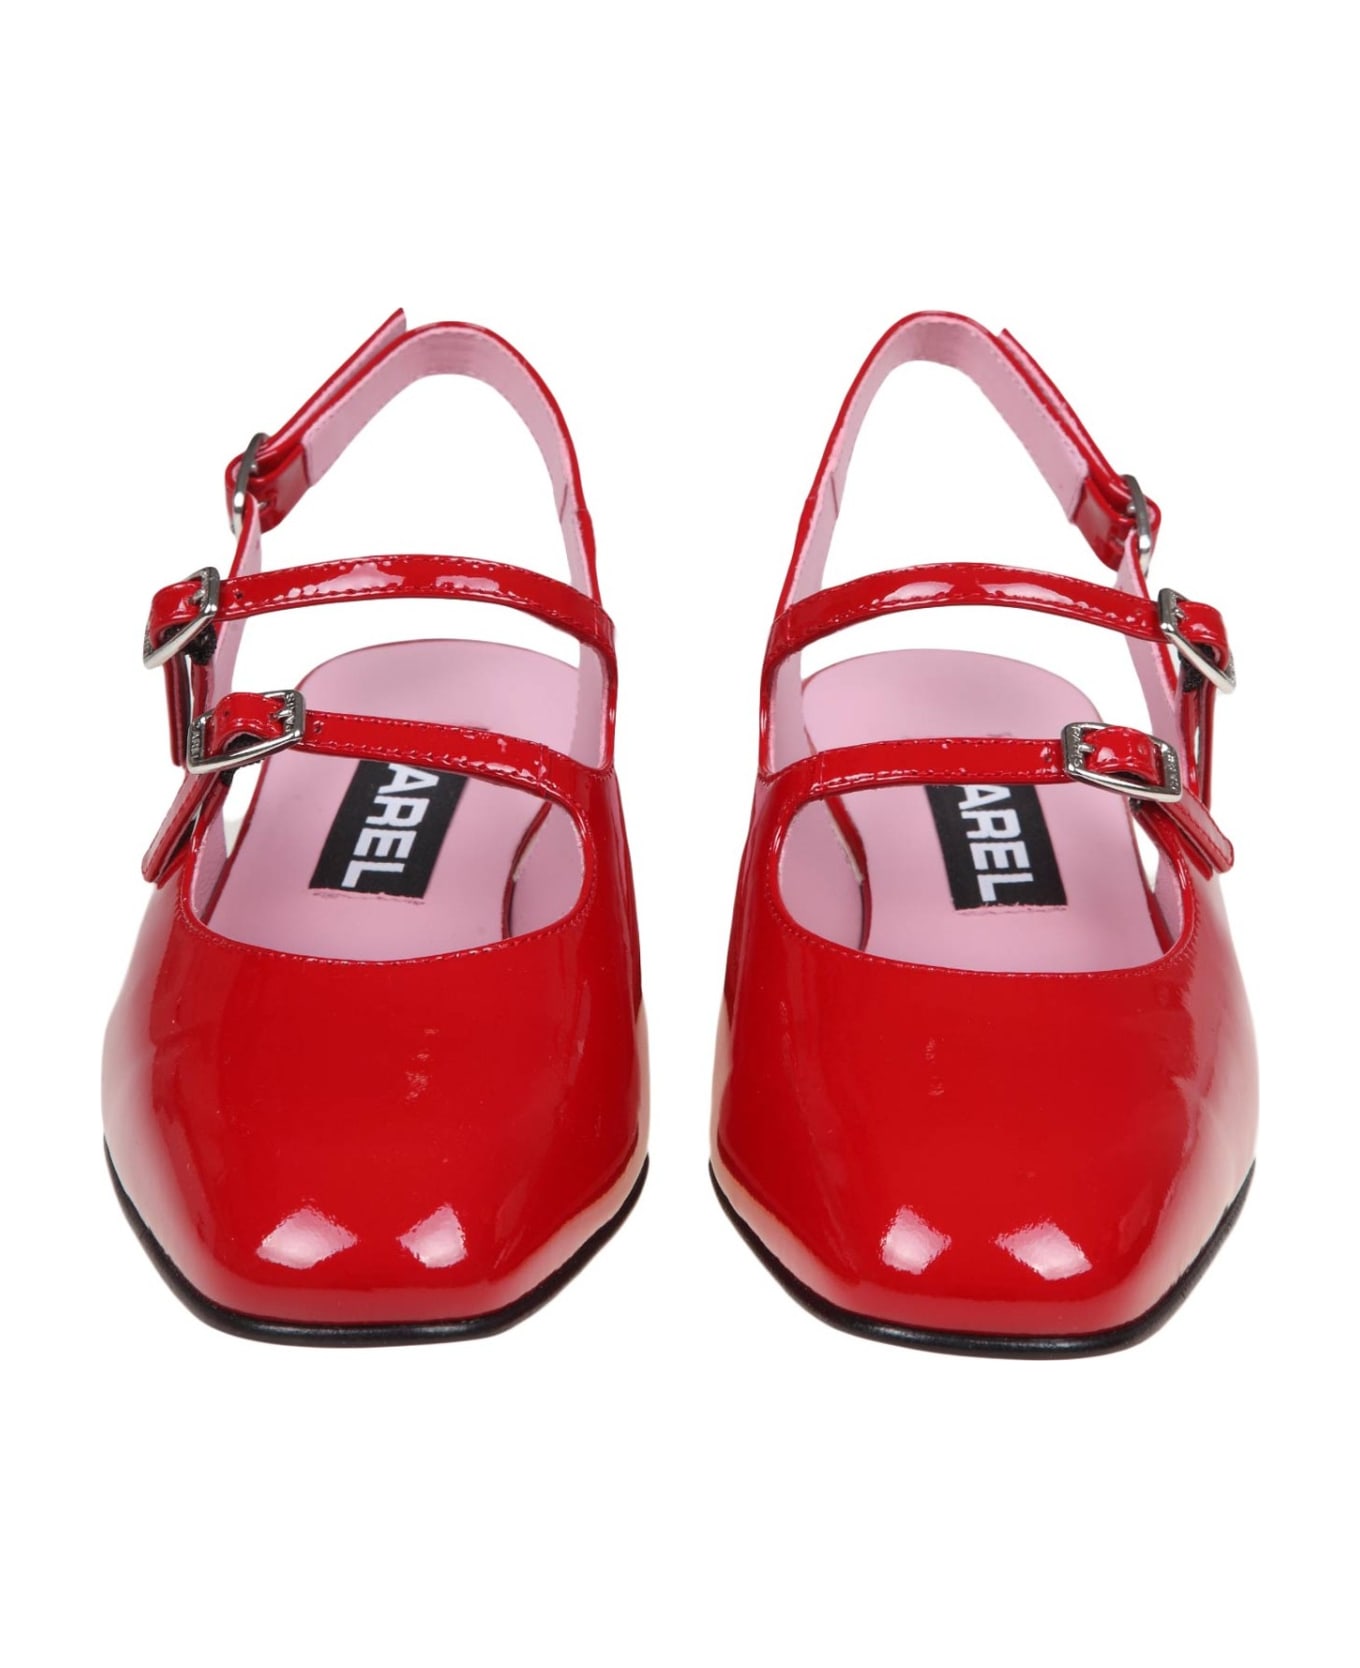 Carel Slingback In Red Patent Leather - Rouge ハイヒール